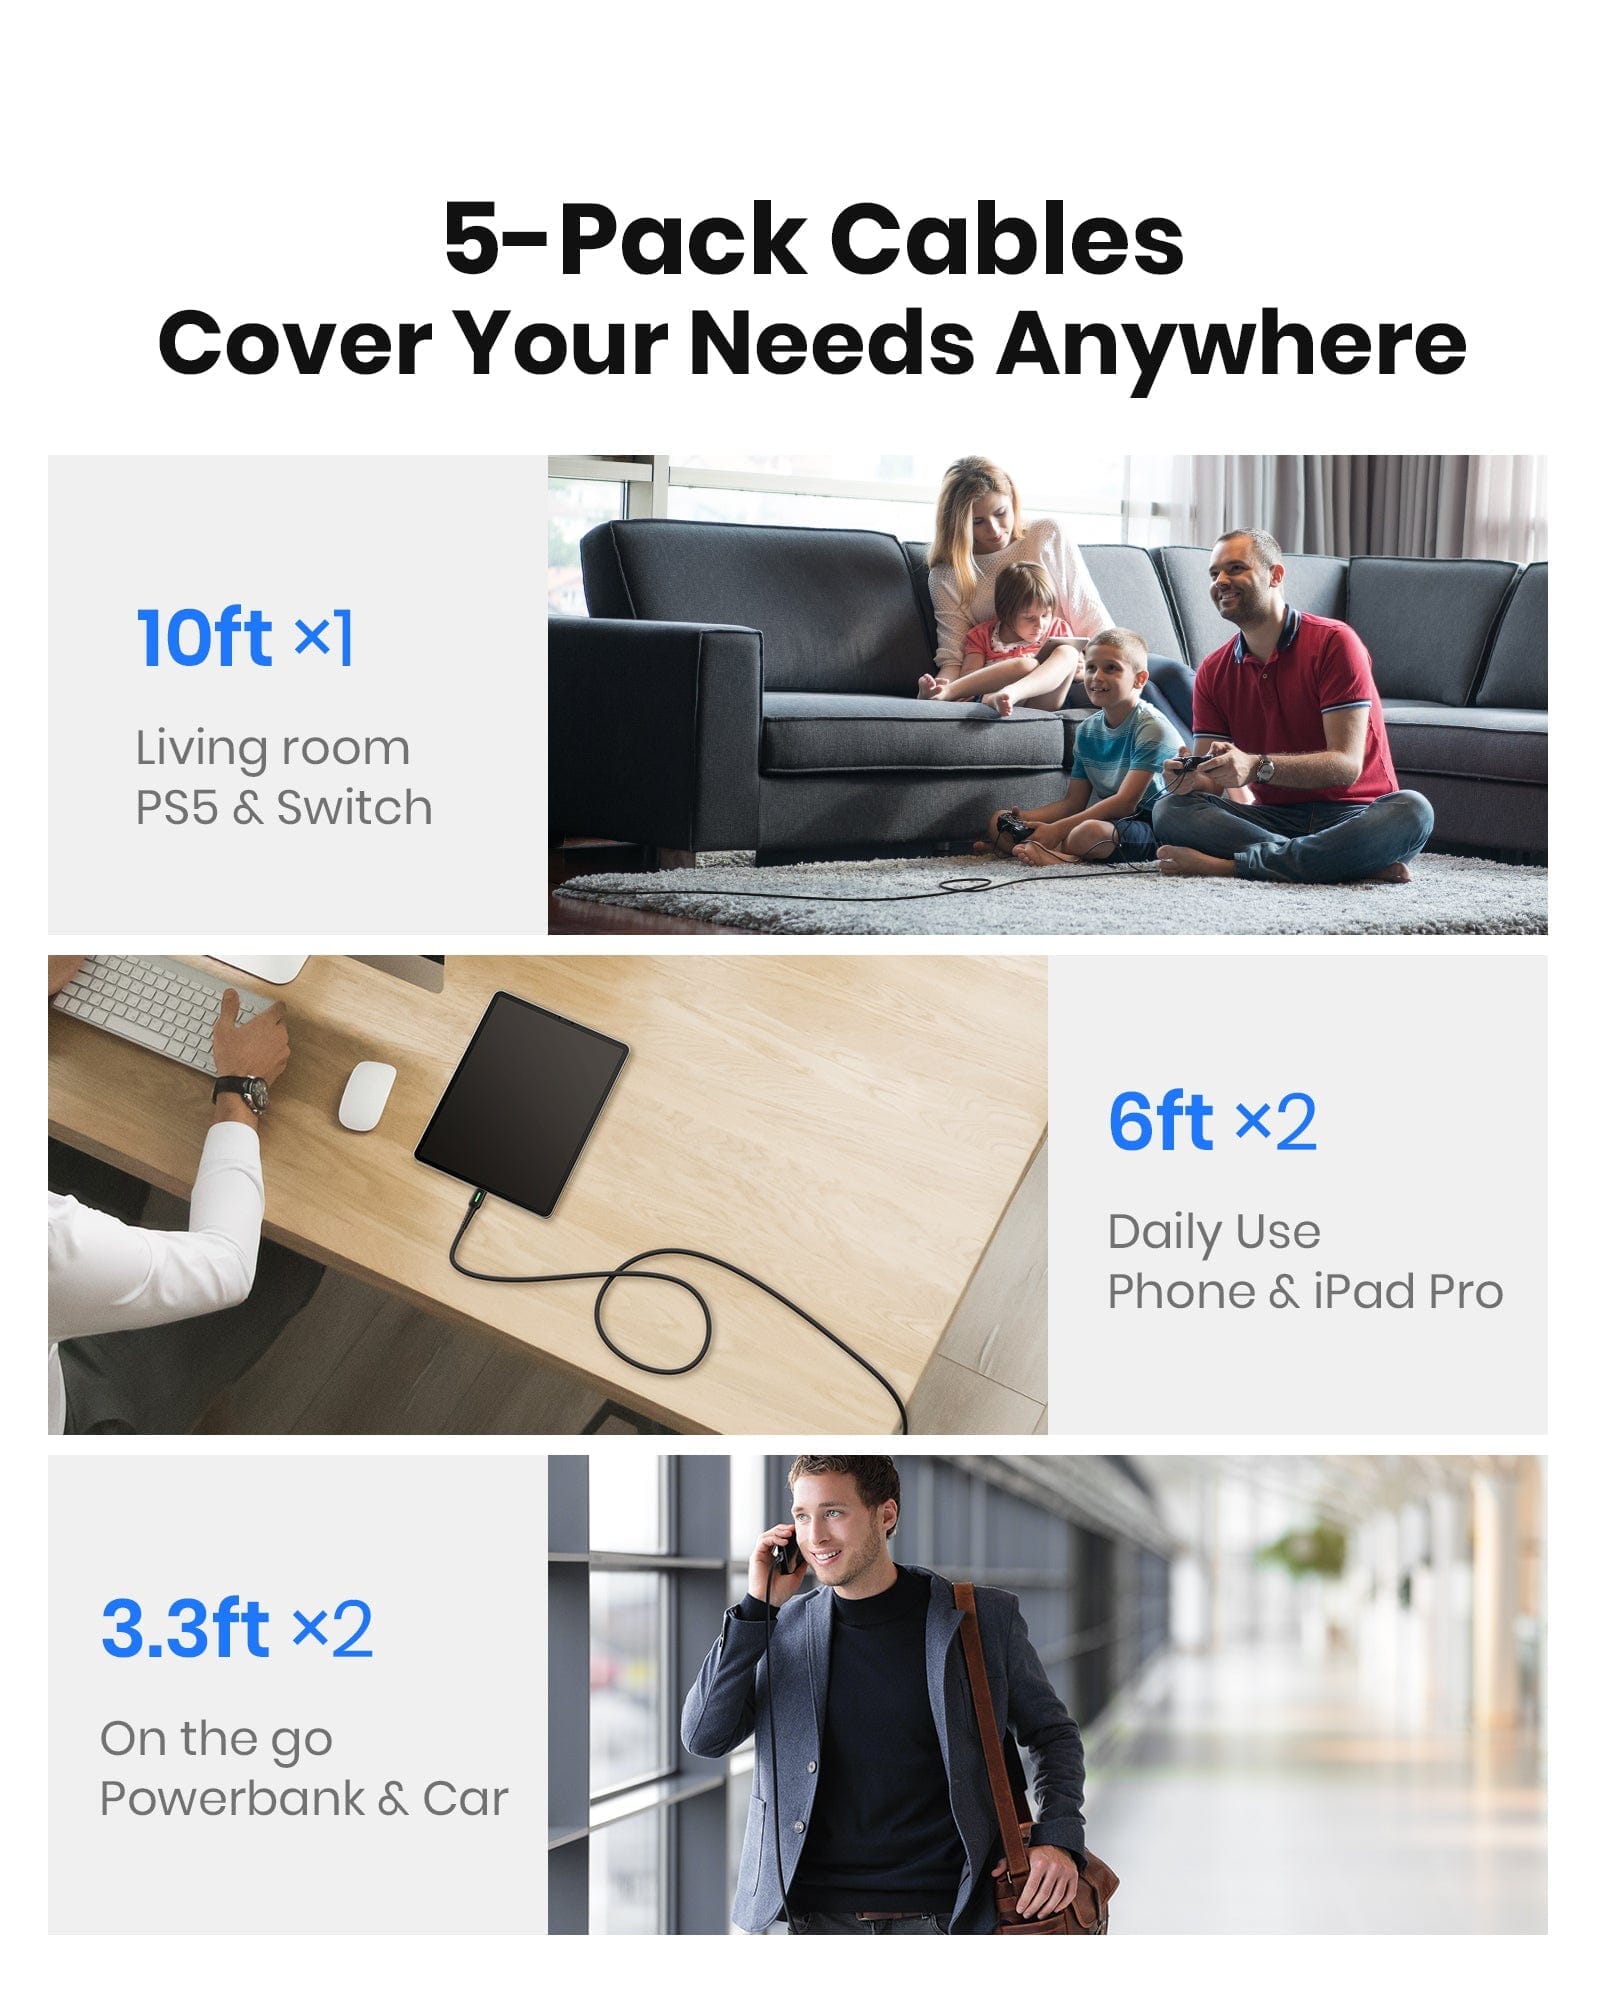 5-pack Cables Cover Your Needs Anywhere